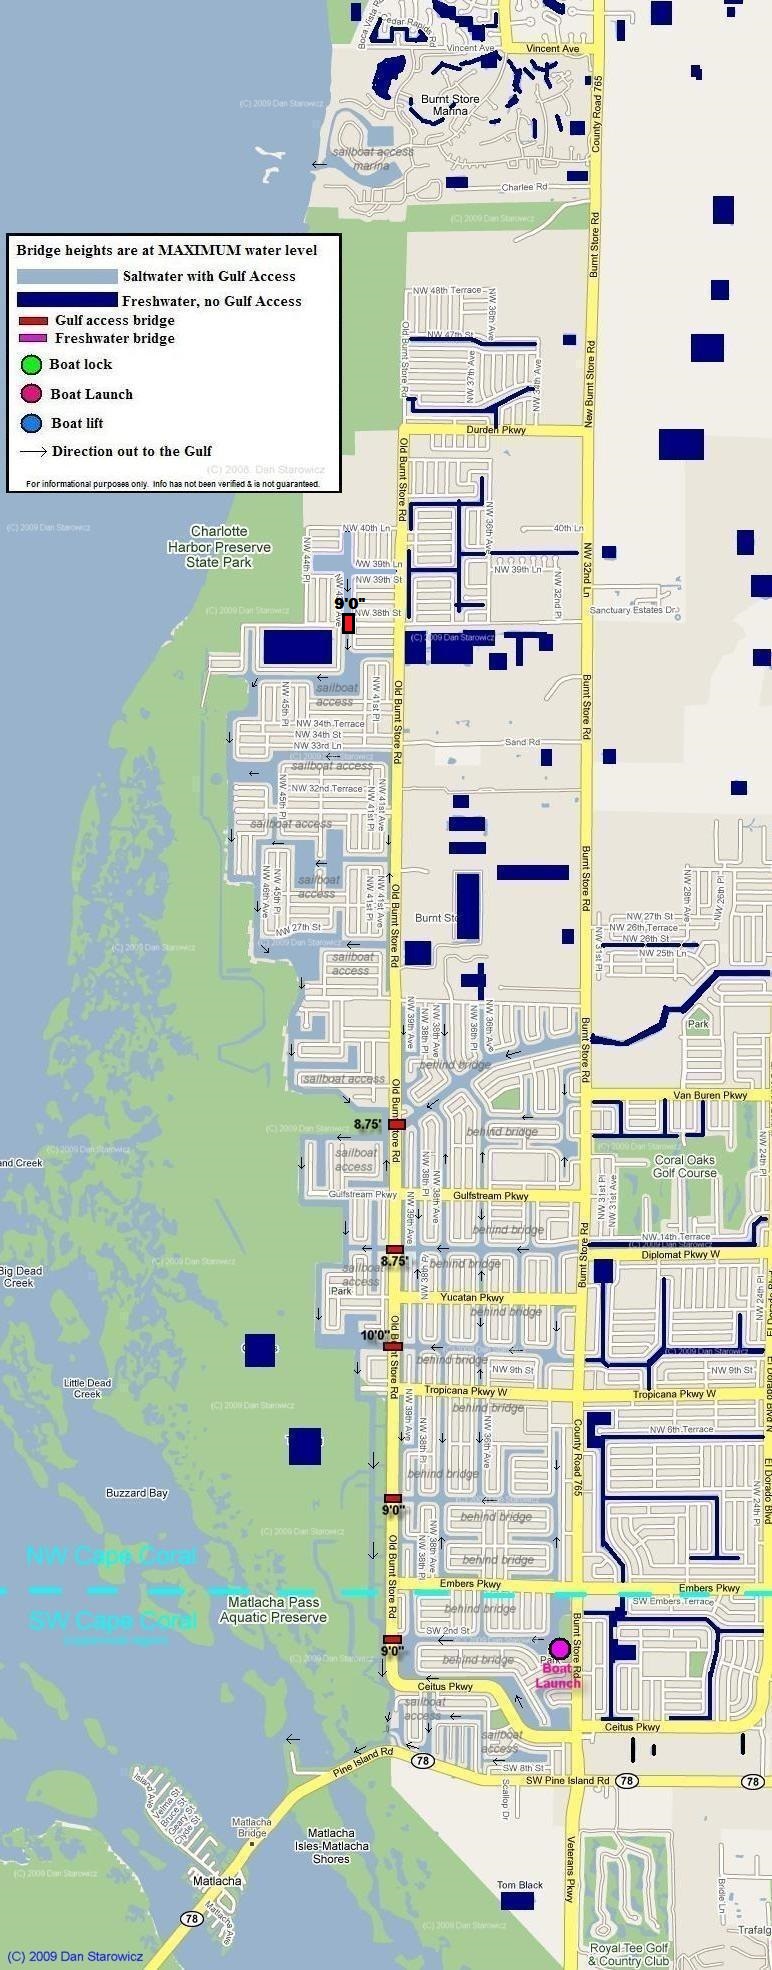 Map of Northwest Cape Coral Florida includes locations and heights of Bridges, boat locks and boat lifts as well as the location of saltwater and freshwater canals includes Burnt Store Marina and Matlacha Pass